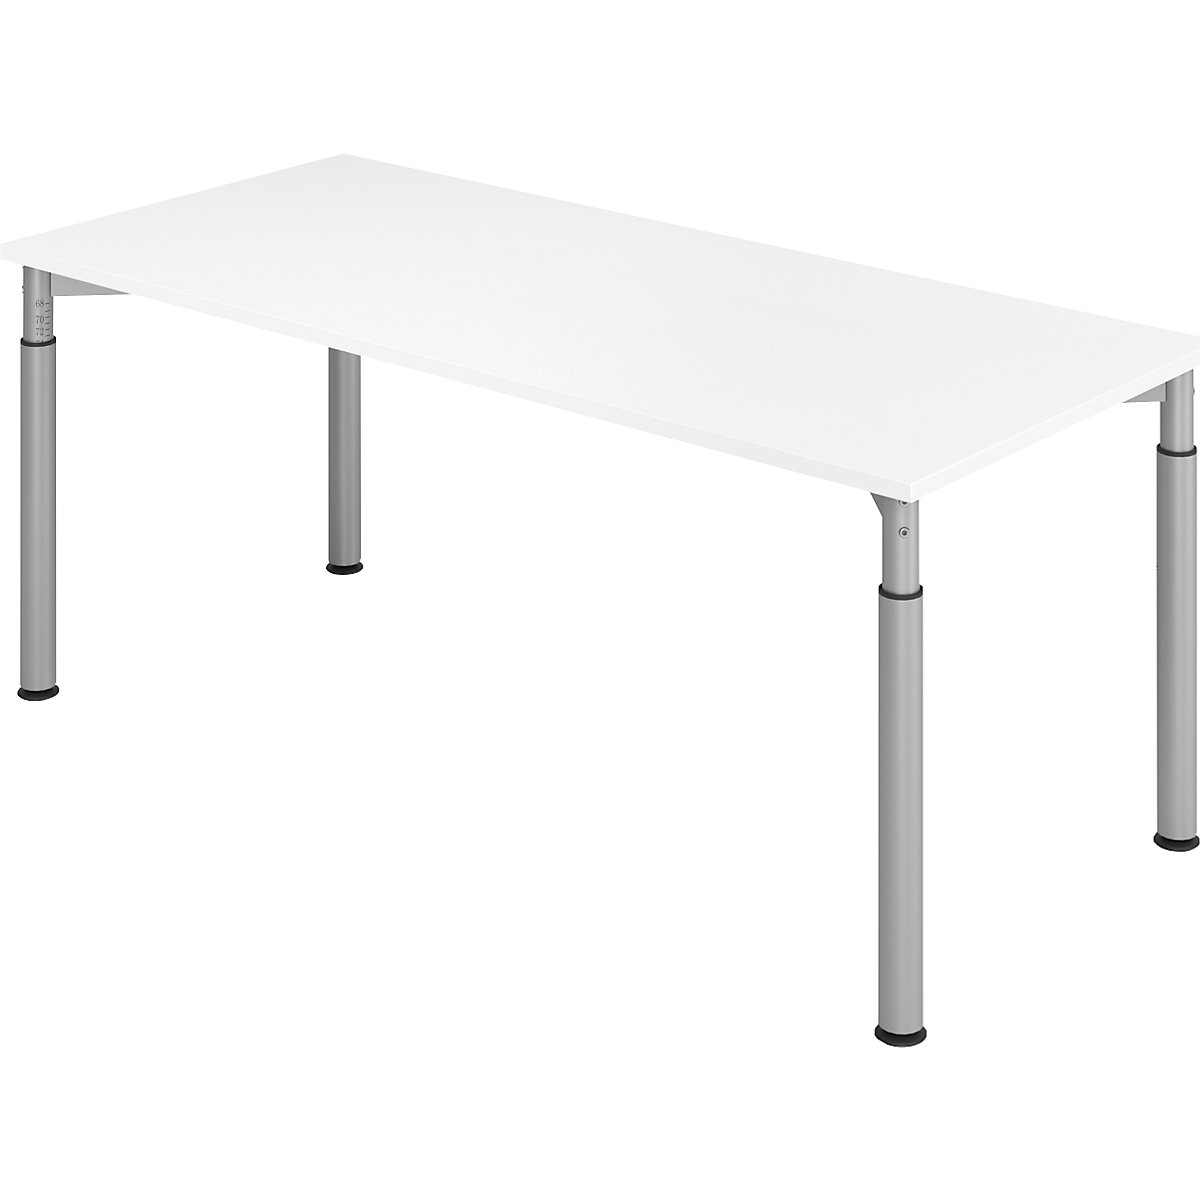 Desk with 4-legged frame VERA-ZWO, height adjustable, WxD 1800 x 800 mm, white top, aluminium silver frame-8